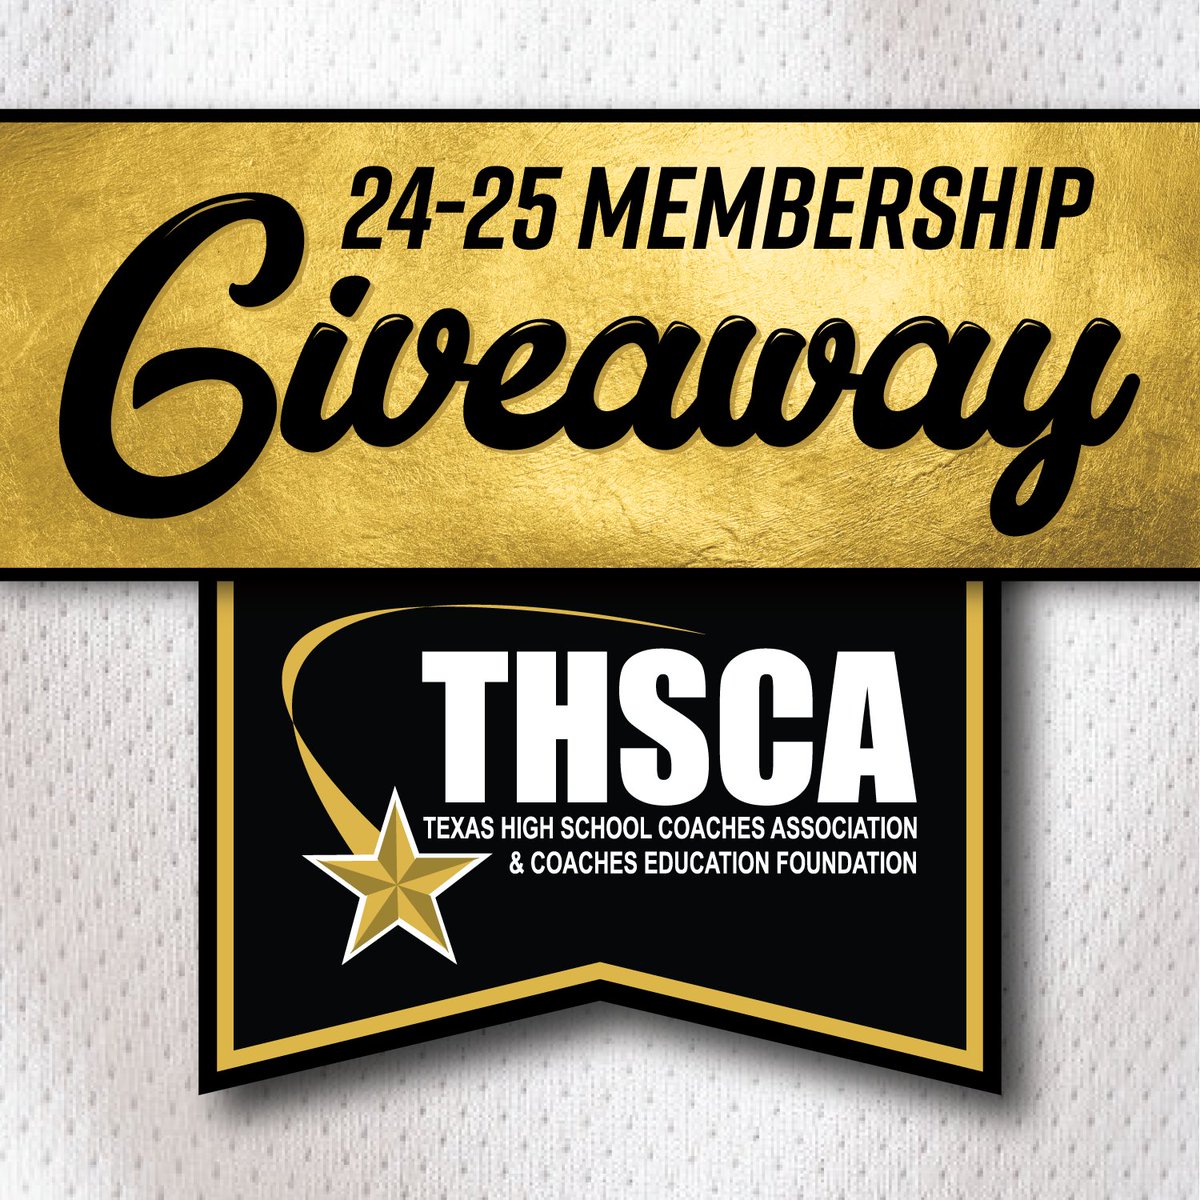 I am giving 5 FREE memberships away to the THSCA to a coach looking to join America's largest coaches association for the 1st time. 

Helping coaches help kids.

DM me for more information on how to win a membership! #THSCABrandAmbassador
@THSCAcoaches | @alleneaglesfb